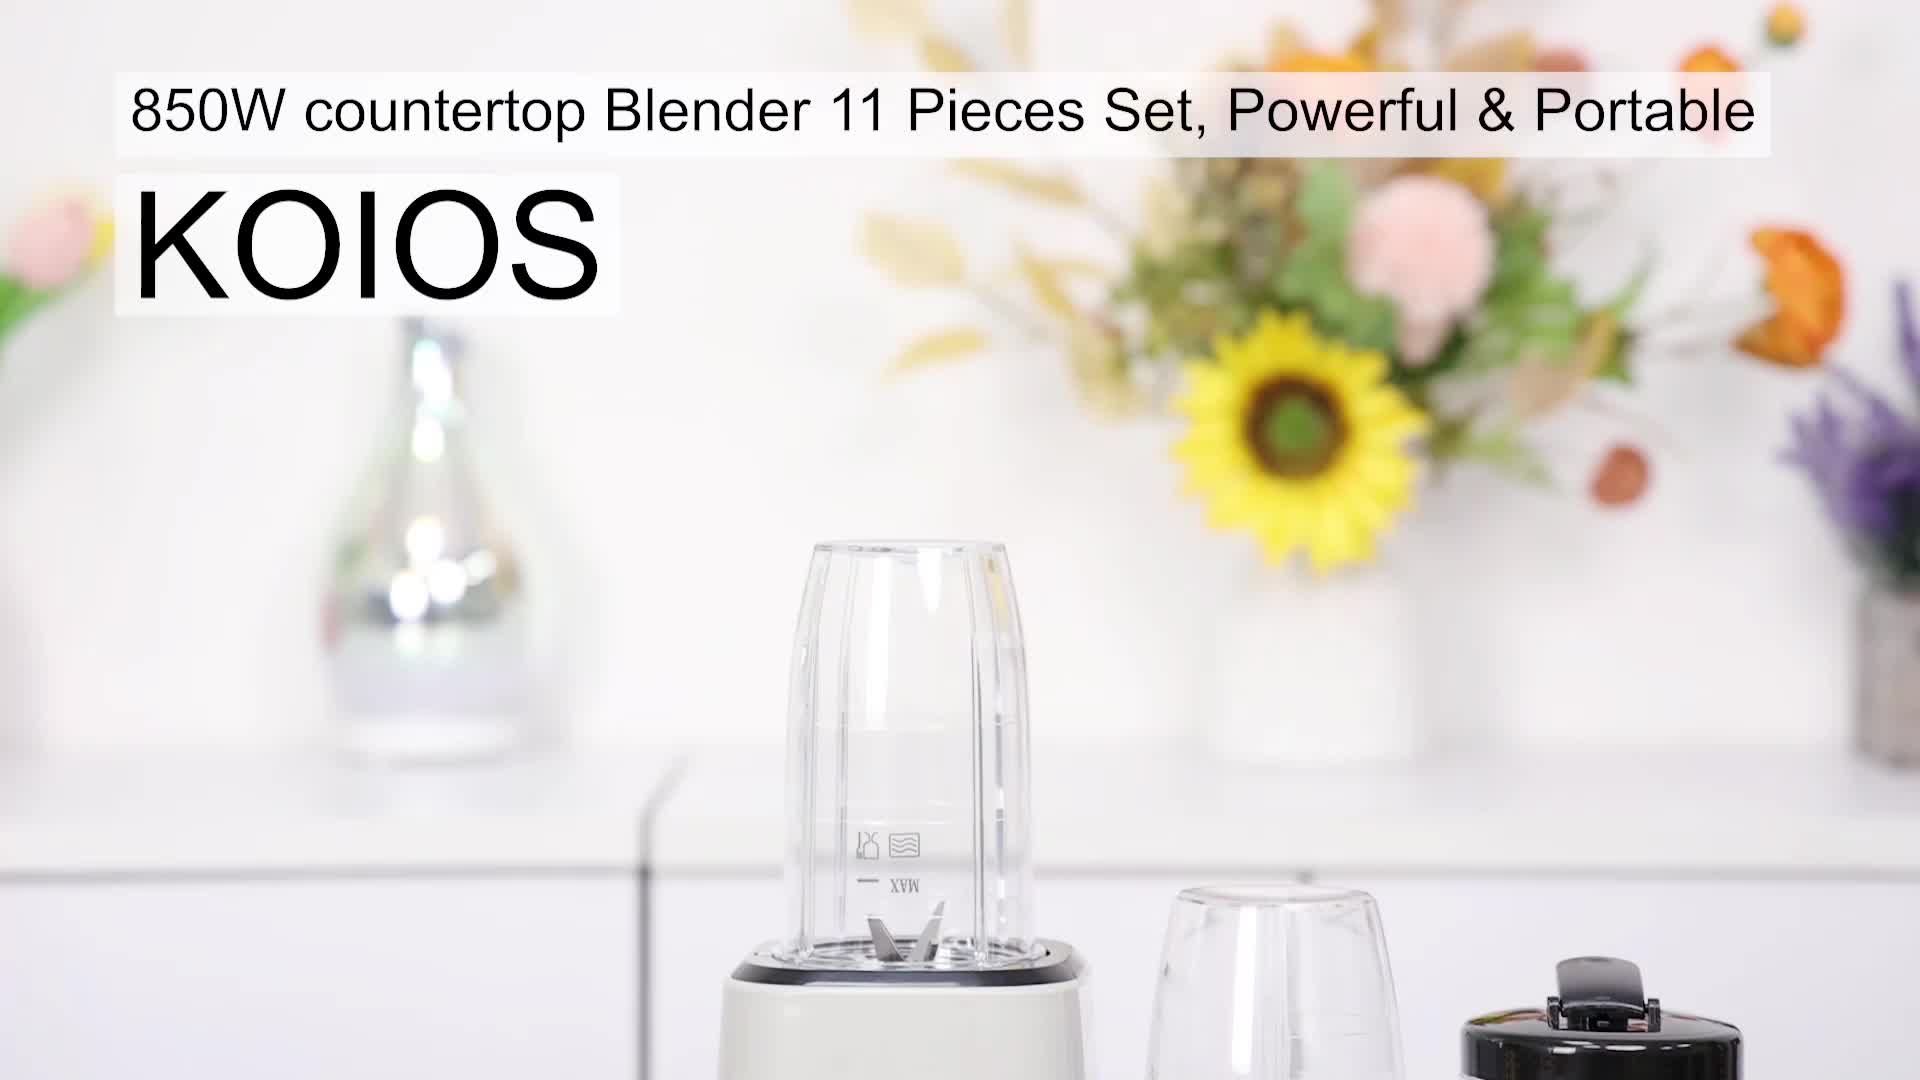  KOIOS 900W Countertop Blenders to Make Shakes and Smoothies  Protein Drinks Baby Food Nuts Spices, Beans Grinder, 11 Pes Personal Blender  with 2x18.6oz and 10oz Cups,BPA Free: Home & Kitchen